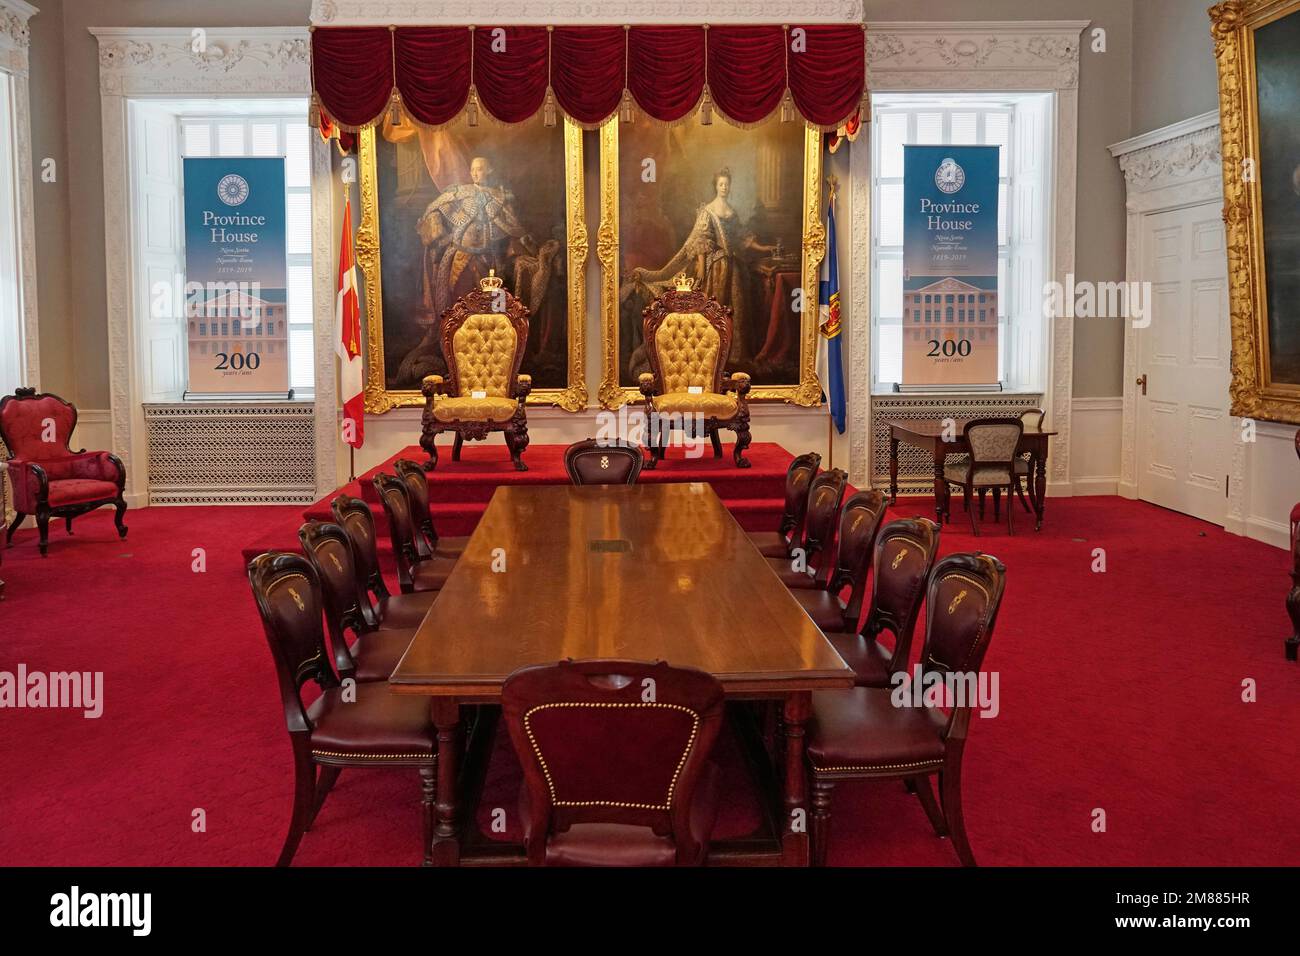 Halifax, Nova Scotia, Canada - August 2019:  Council chamber of the Nova Scotia provincial government's legislature, with ornate thrones from a royal Stock Photo